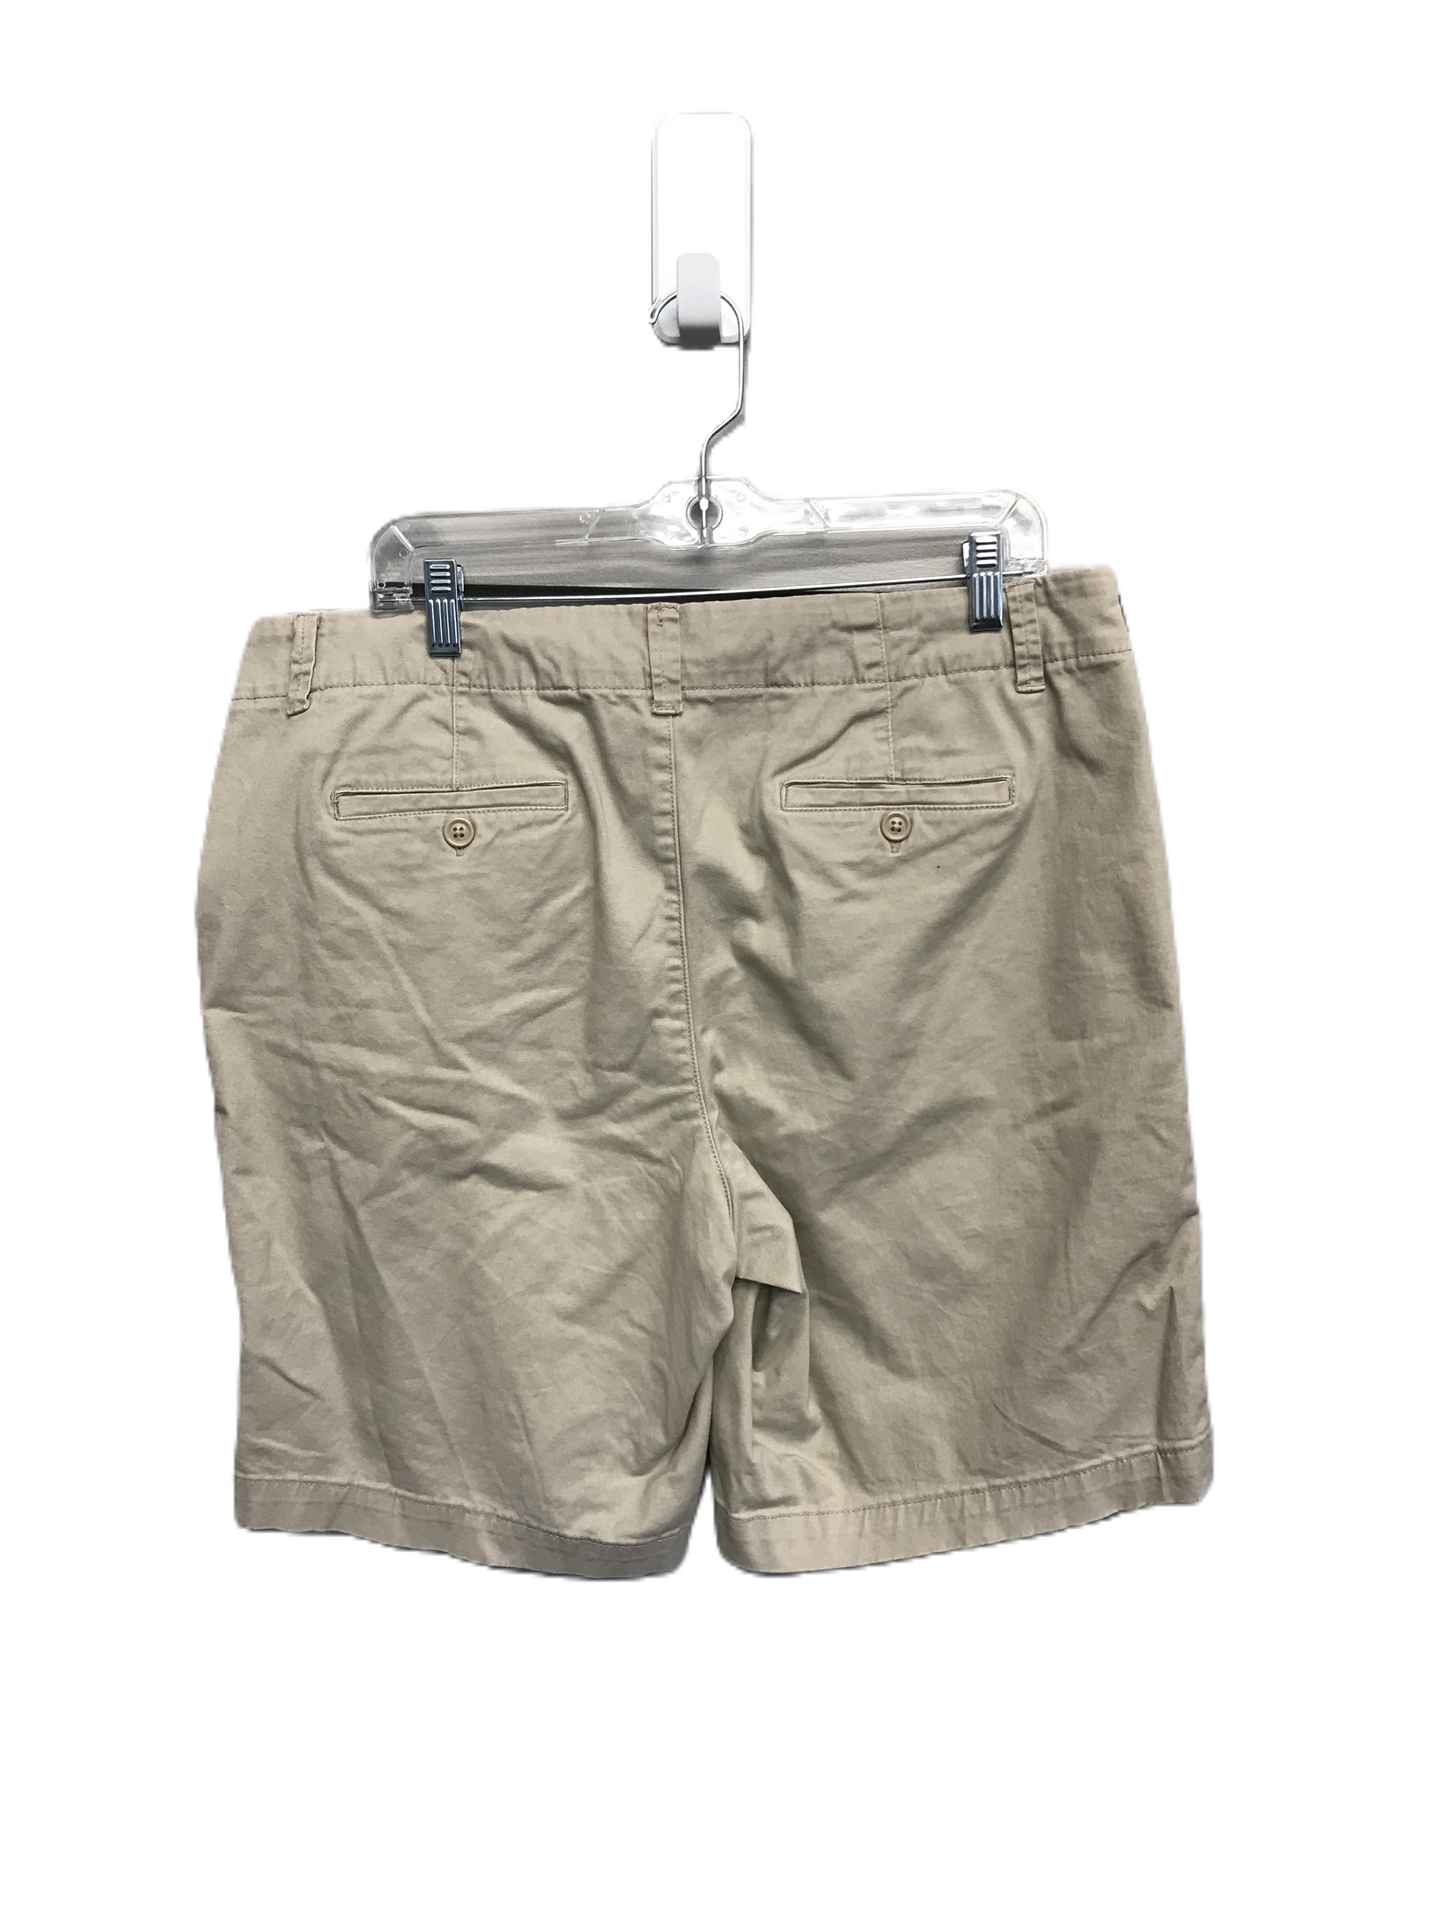 Tan Shorts By Charter Club, Size: 14